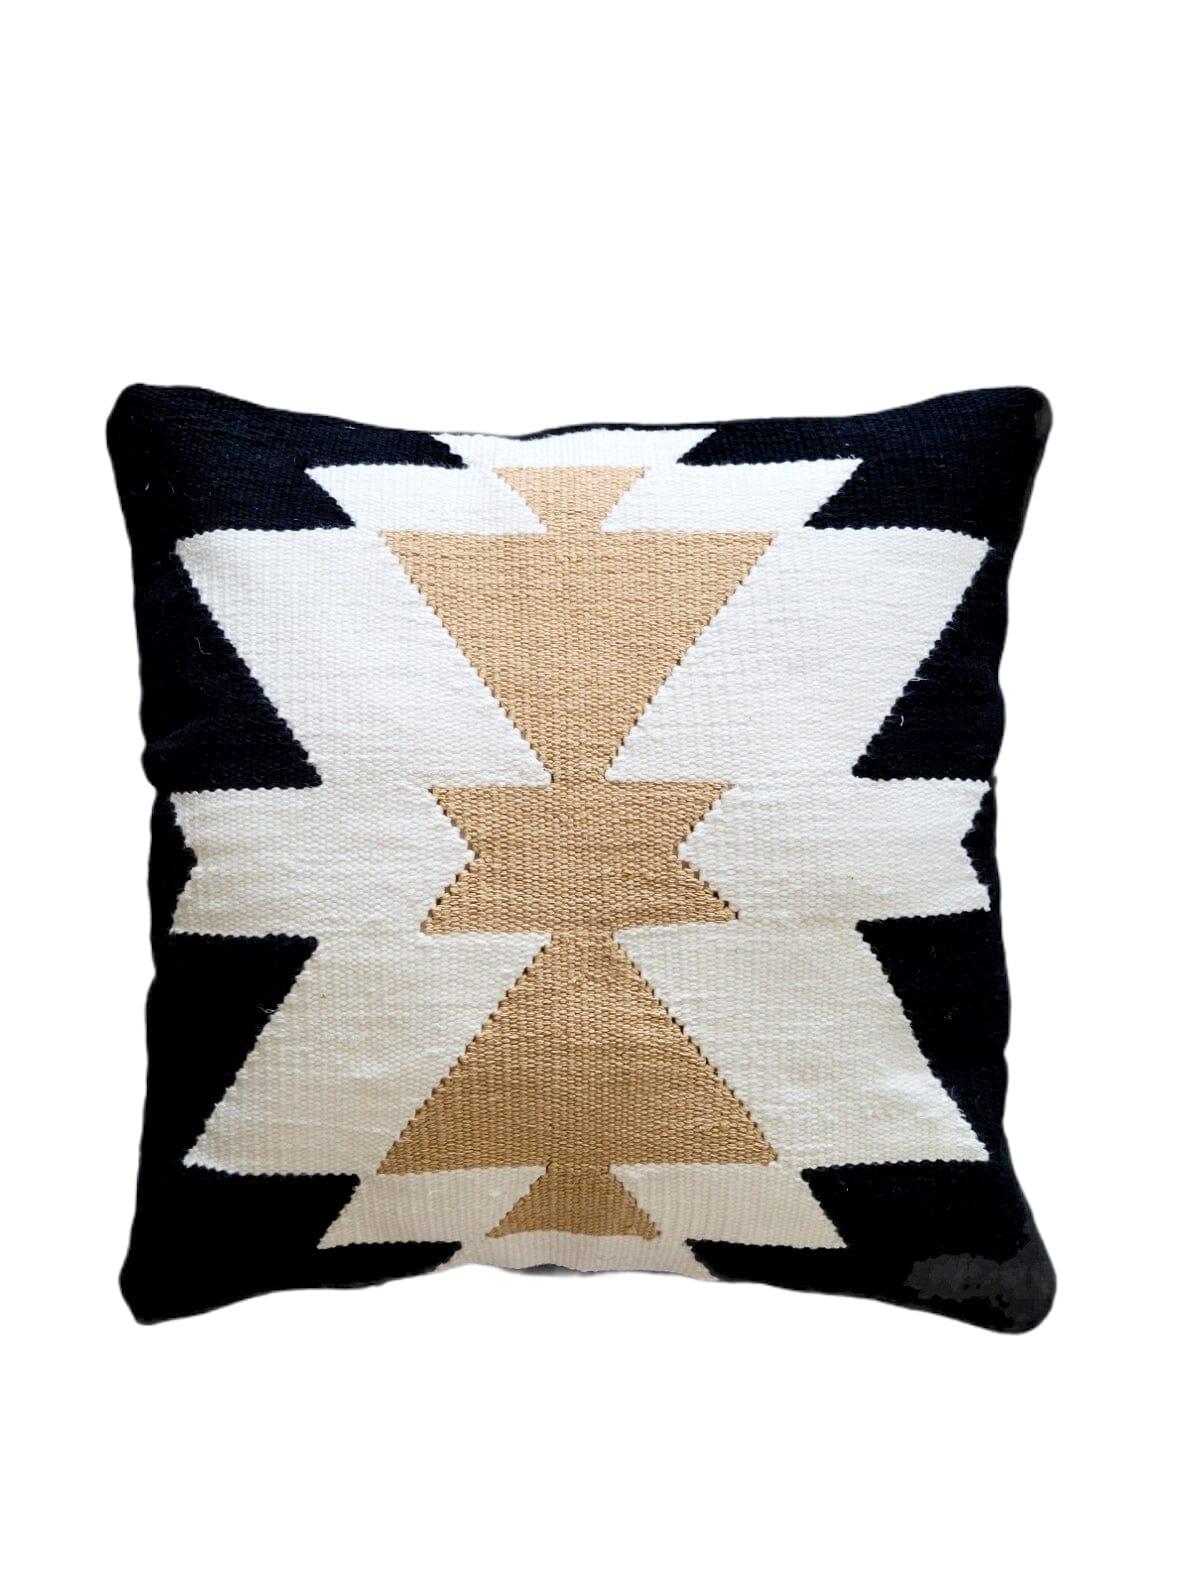 Egyptian Passion Black & White Cotton Pillow Cover For Sale